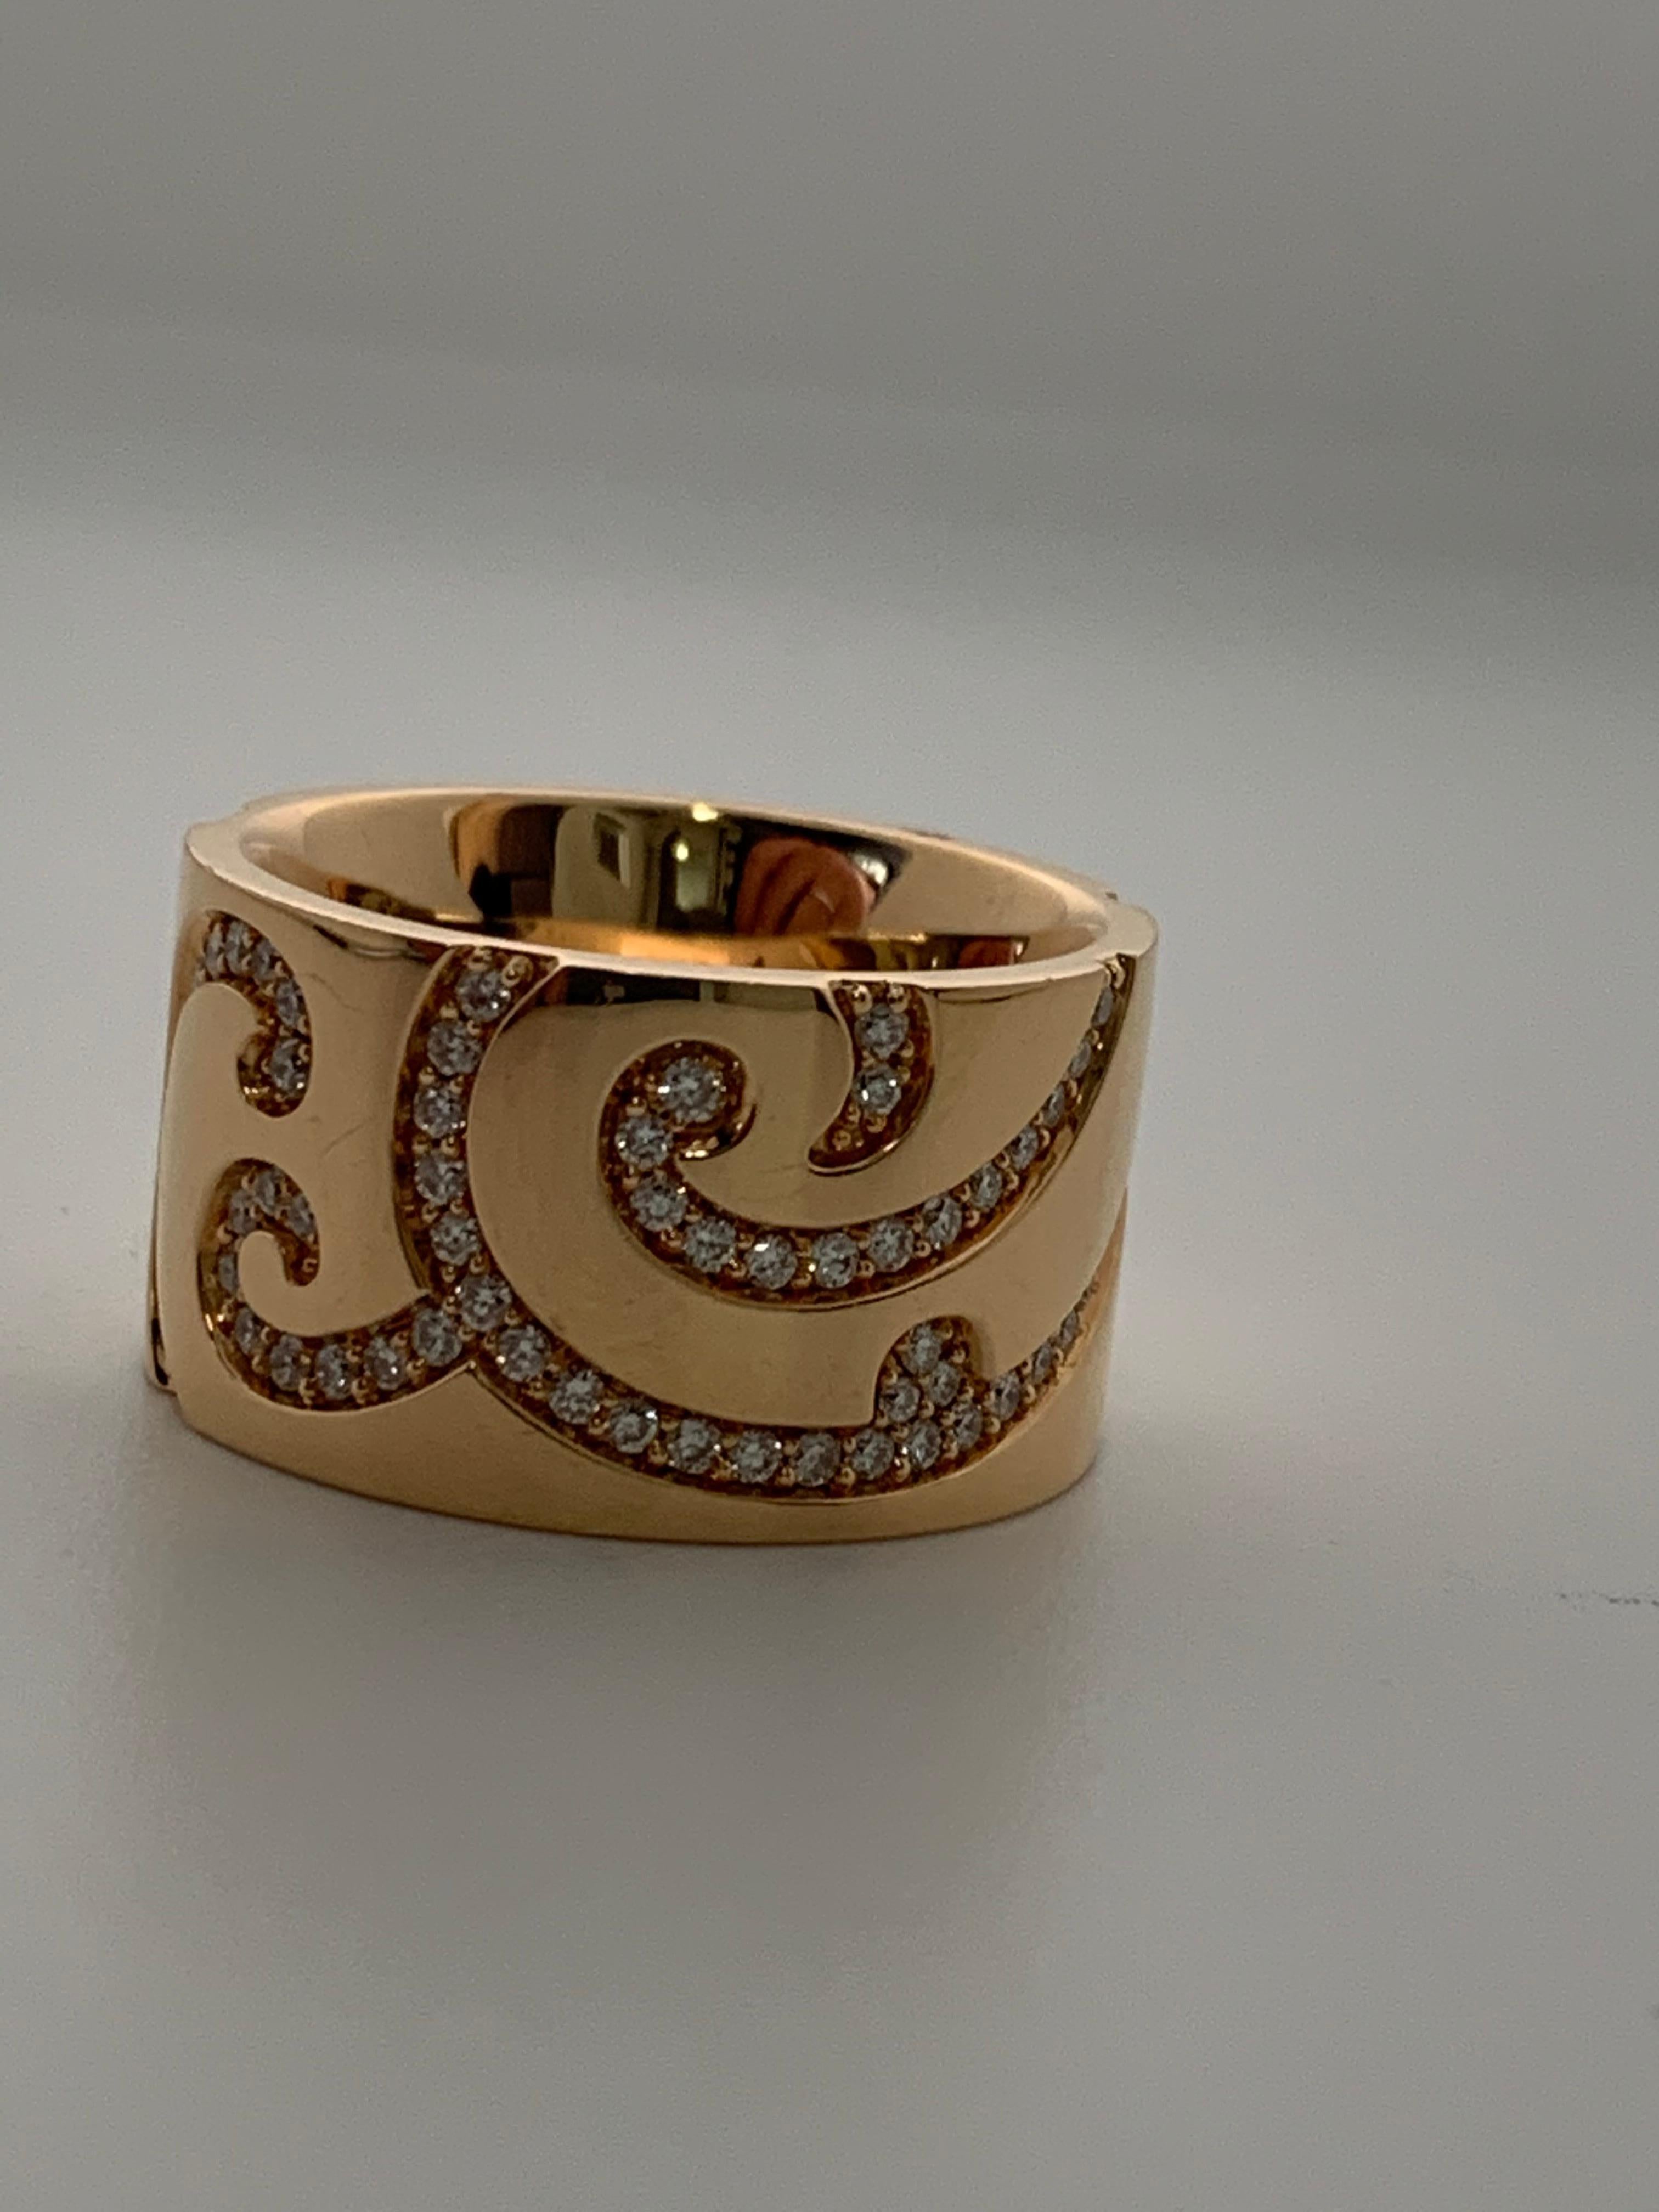 Wide Cigar Band with a whimsical and elegant feel. Solid 18 Karat Gold for a nice and strong feel on the finger. Goes very well paired with a Rose Gold watch or accented Rose Gold Watch. Will definitely become a very often used piece as it can go